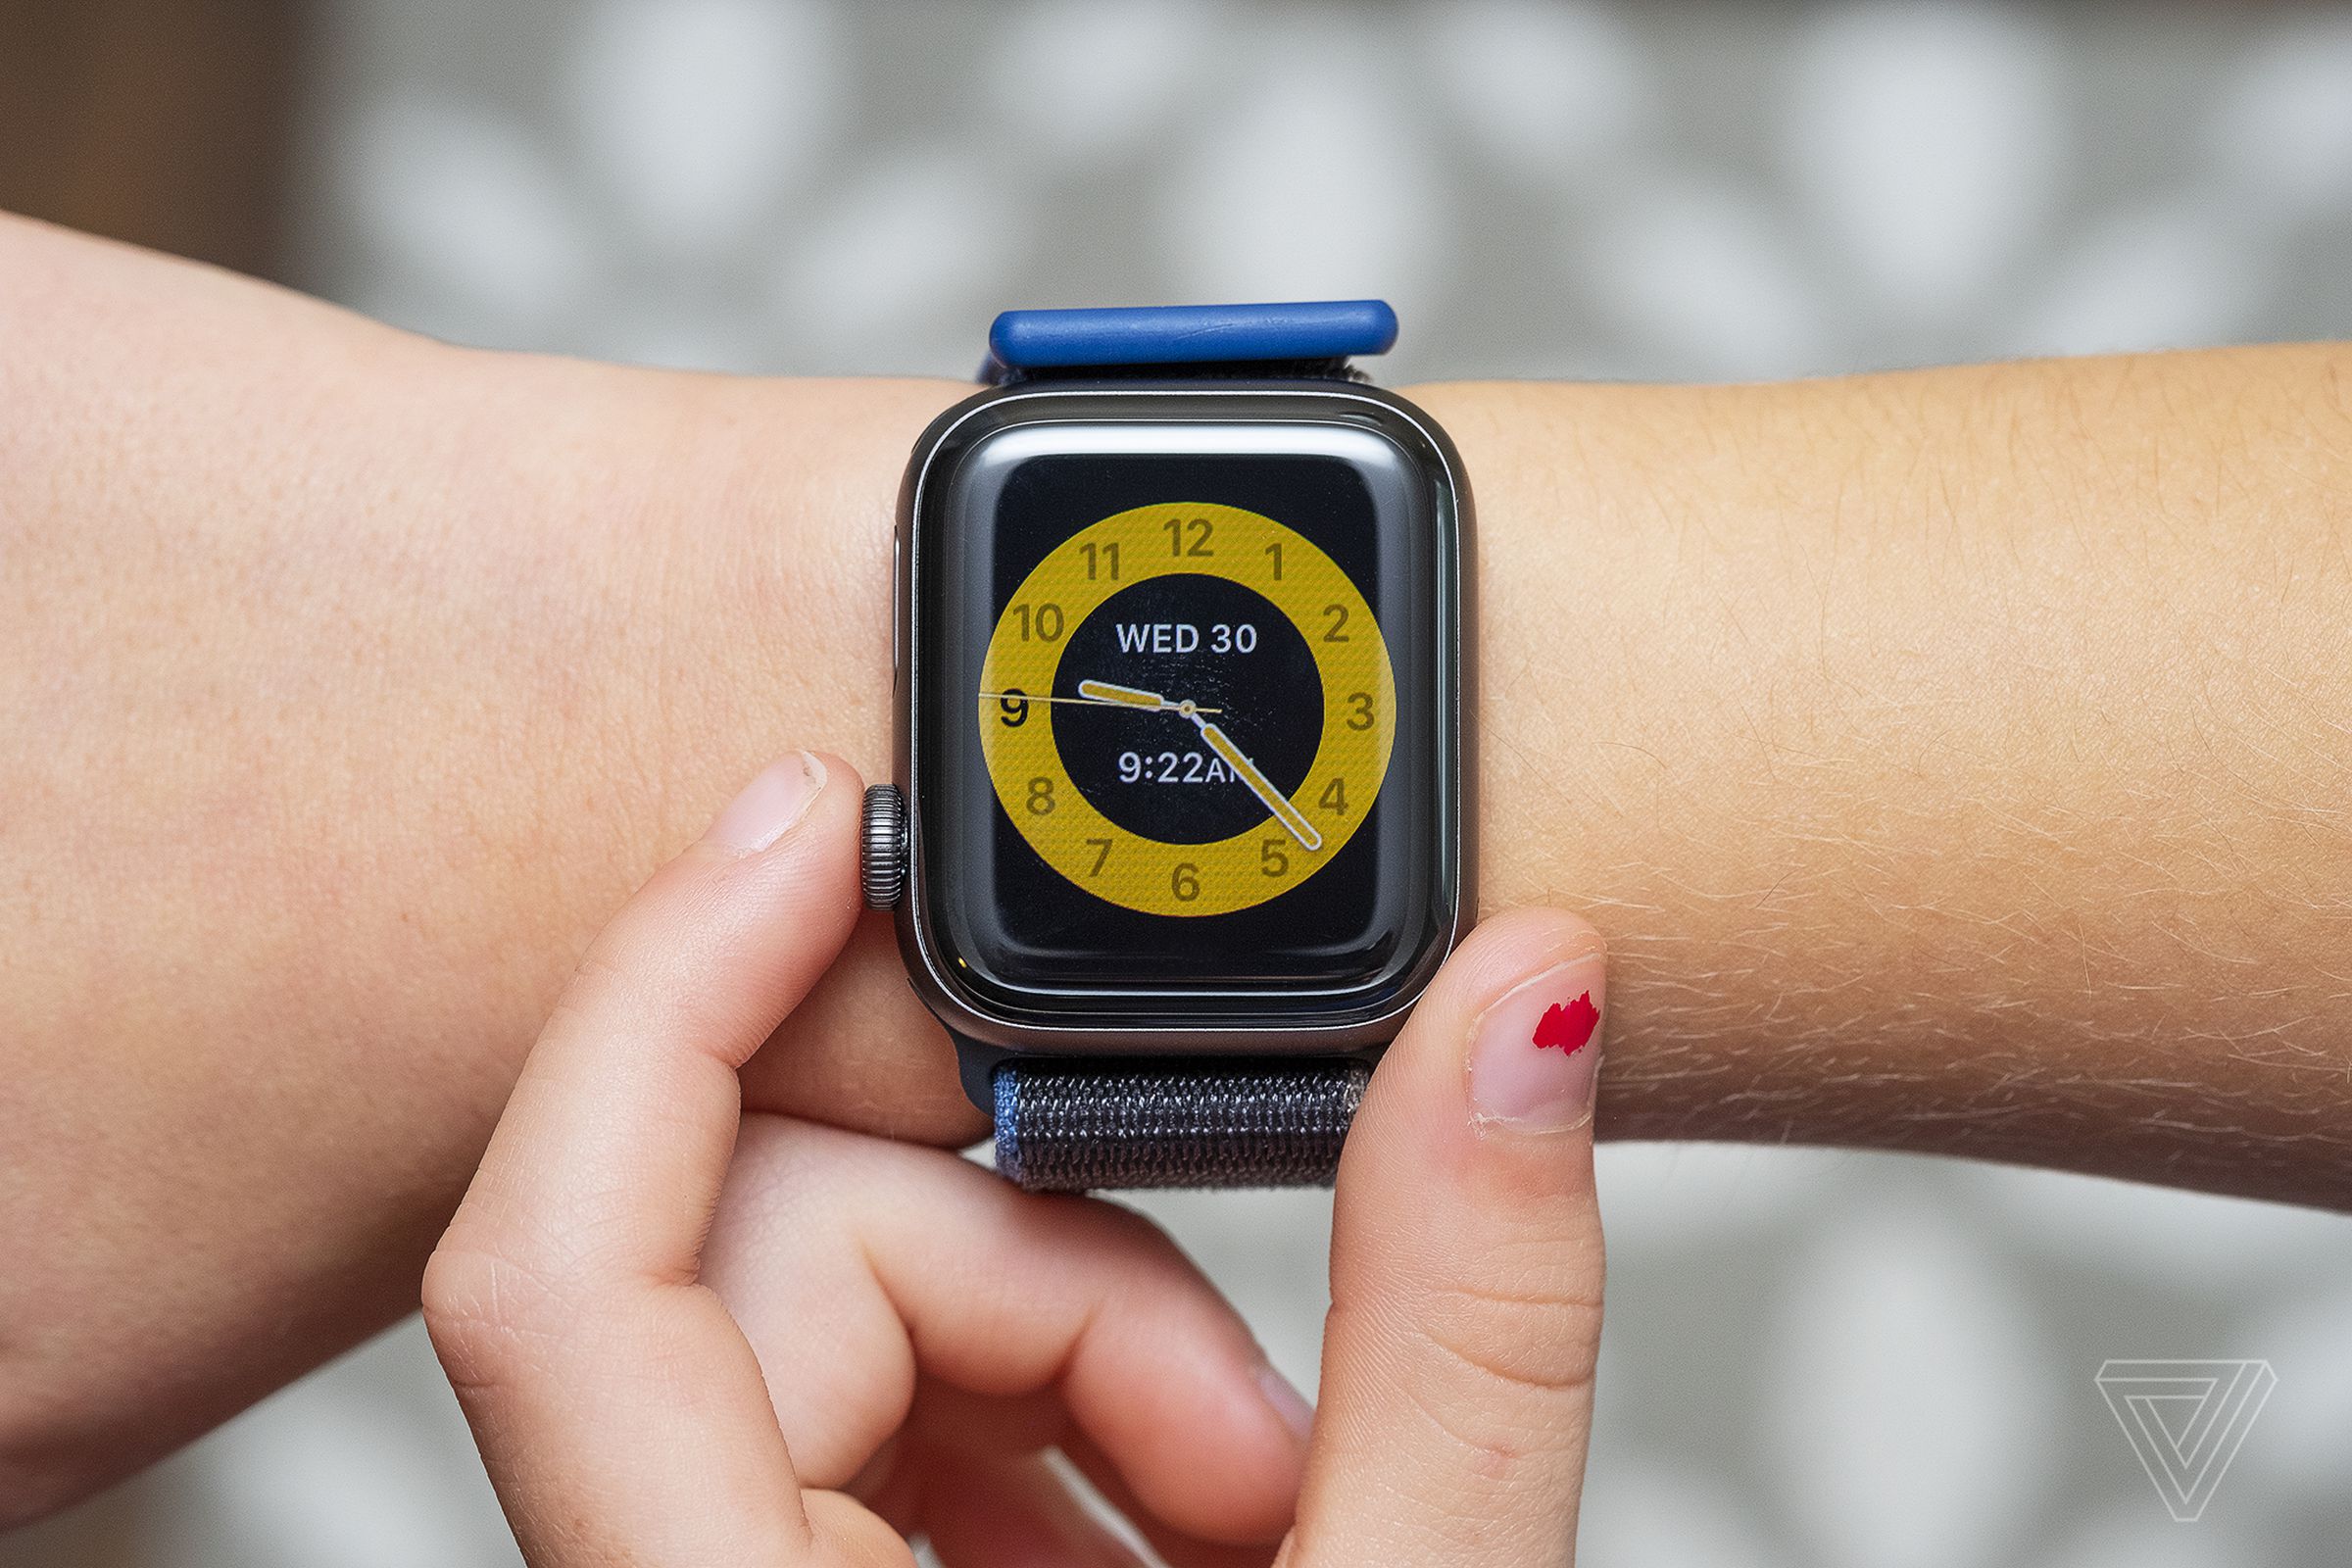 An Apple Watch showing the Schooltime watchface.